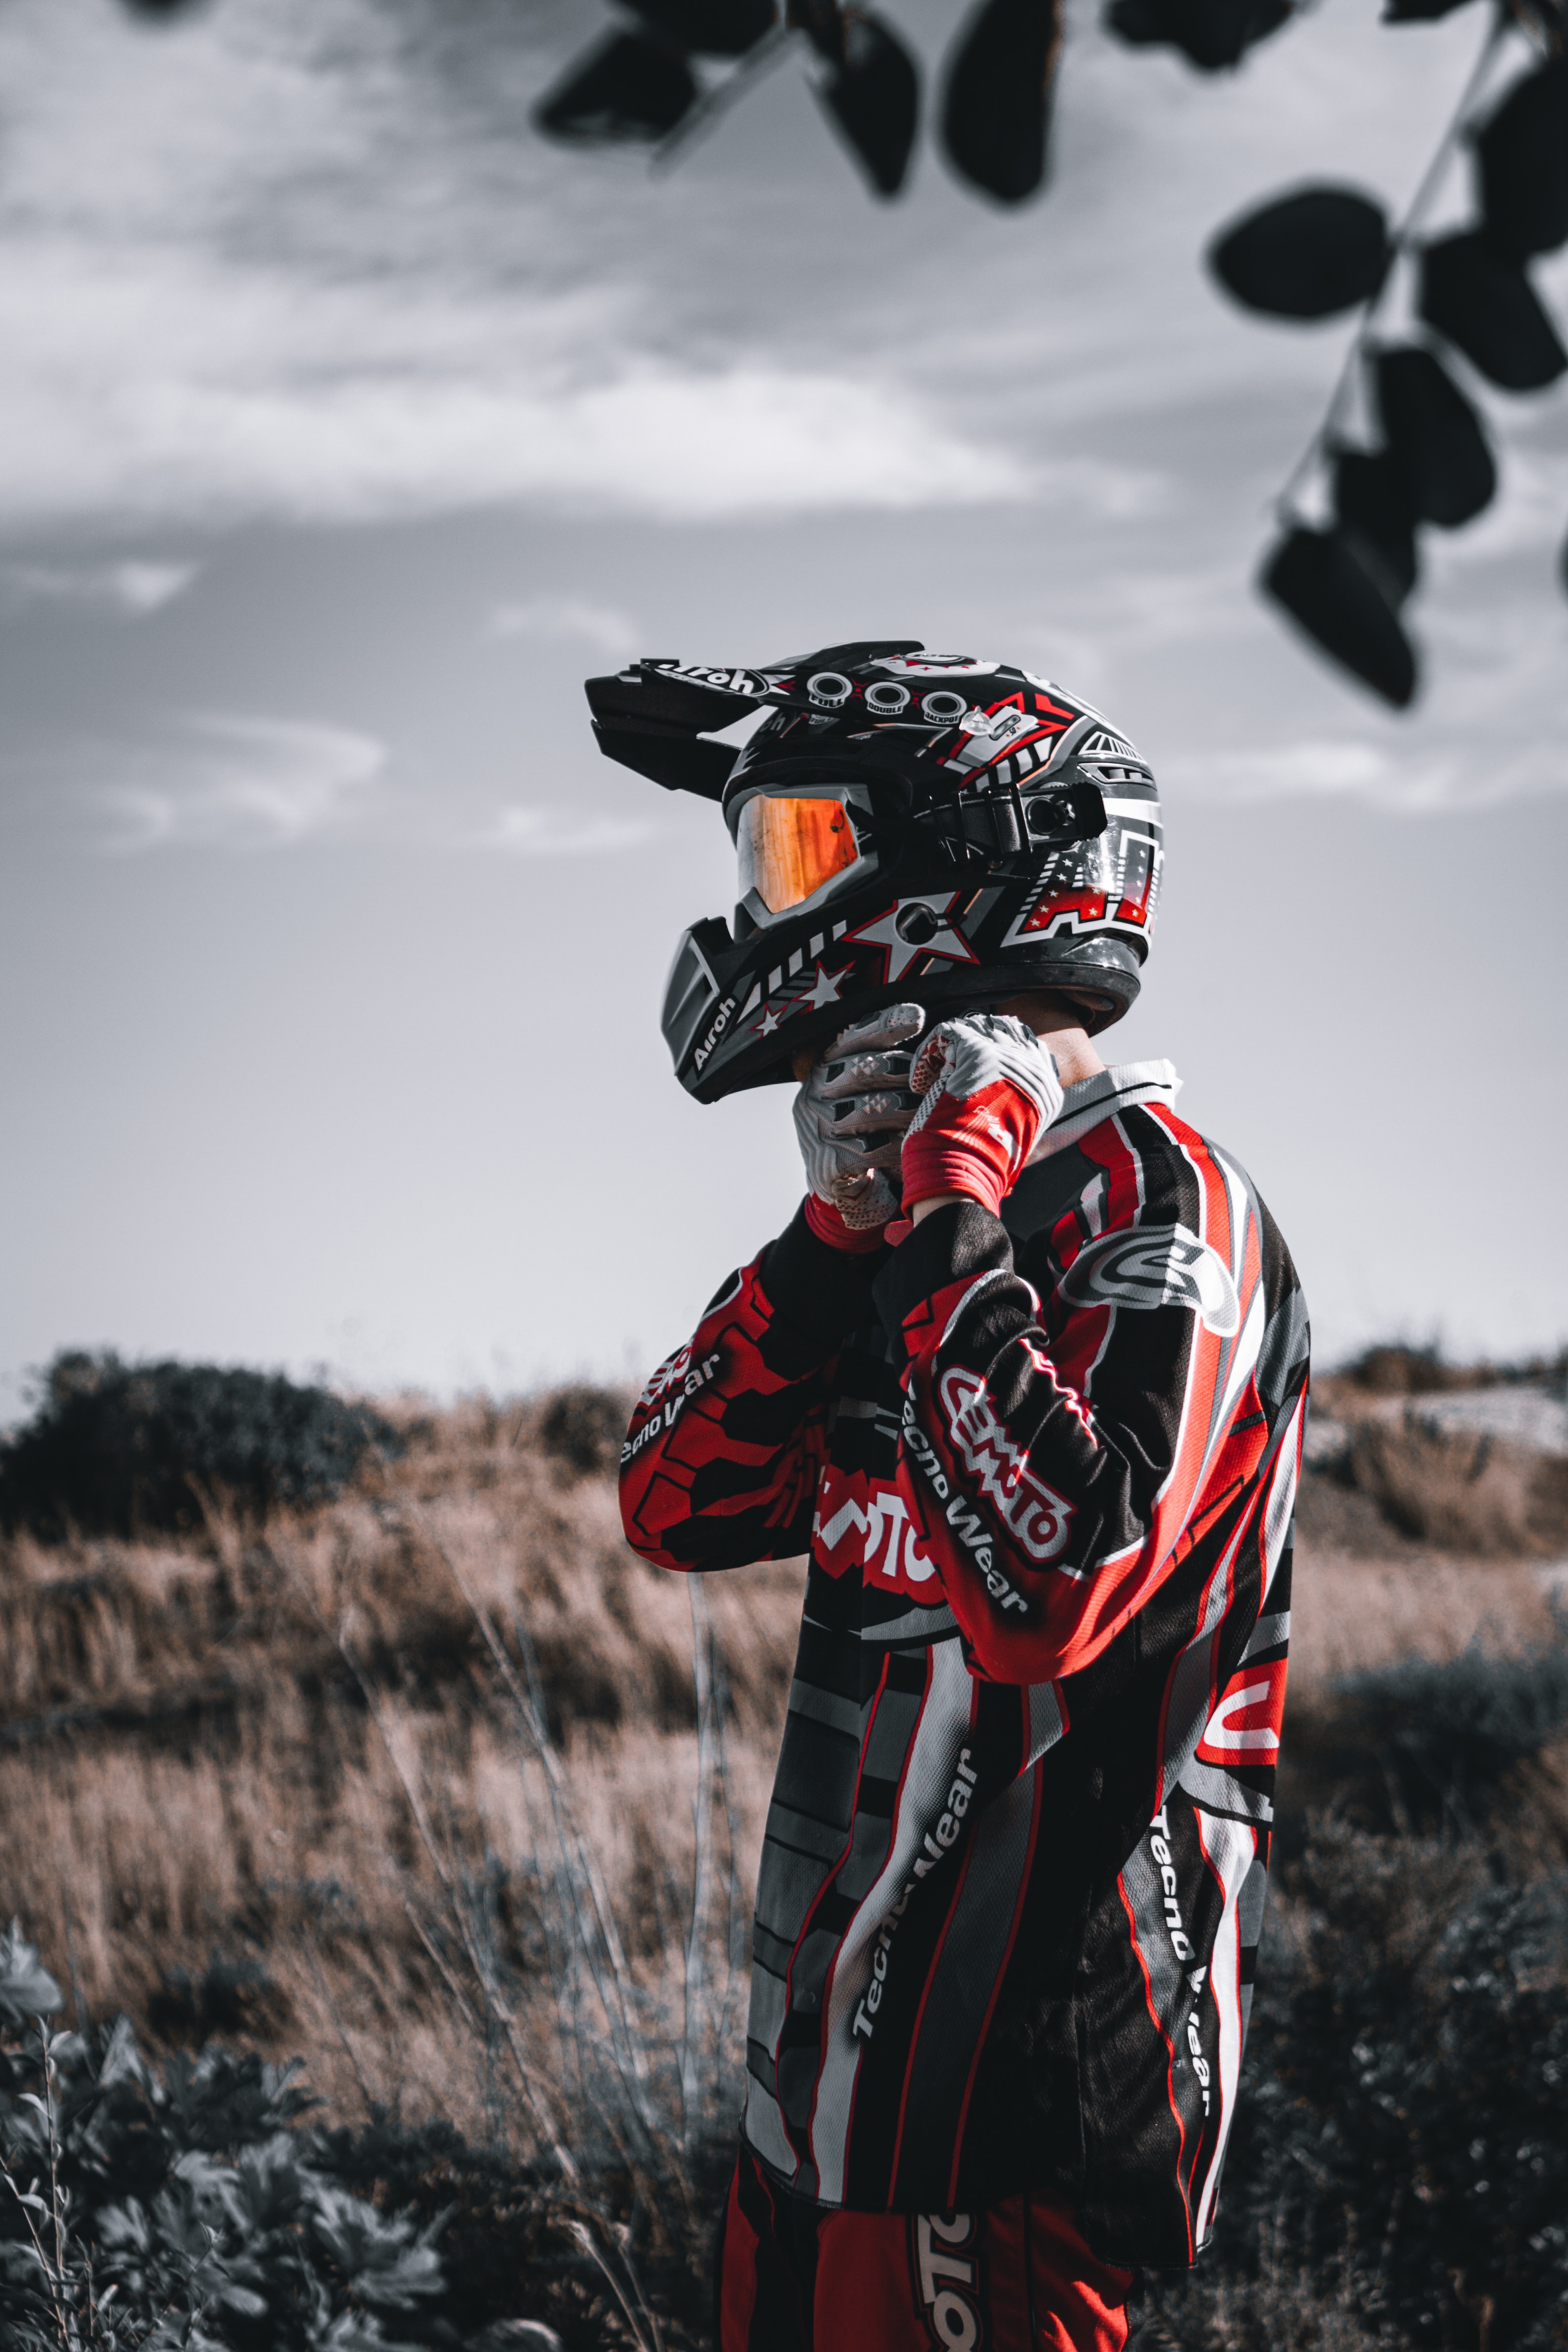 Best Motorcyclist wallpapers for phone screen